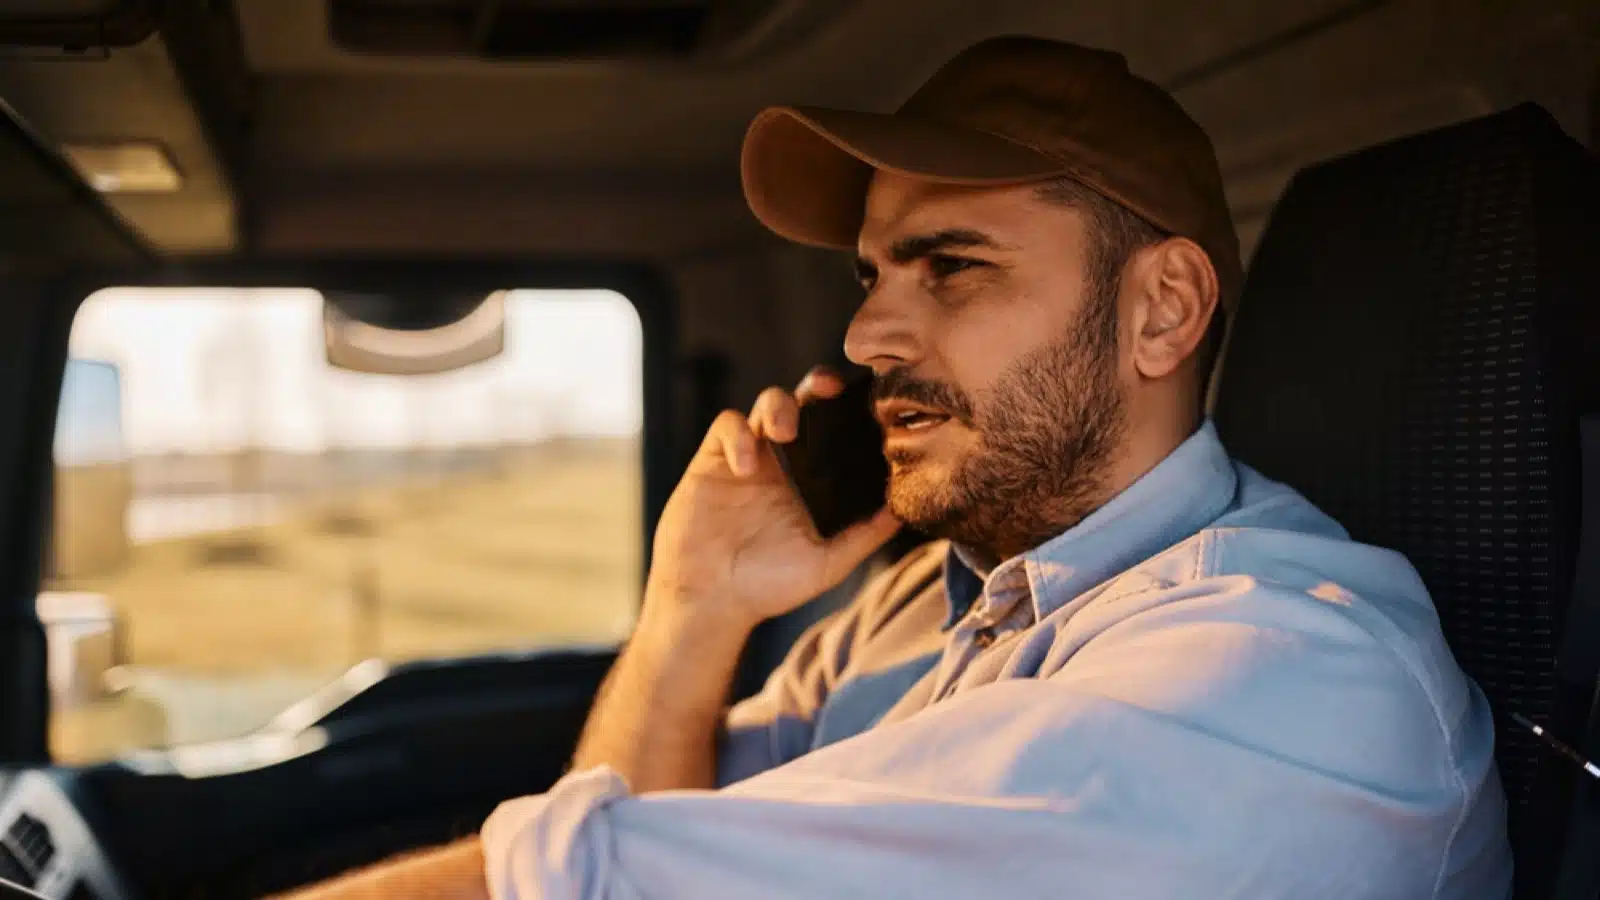 Delivery truck driver in phone